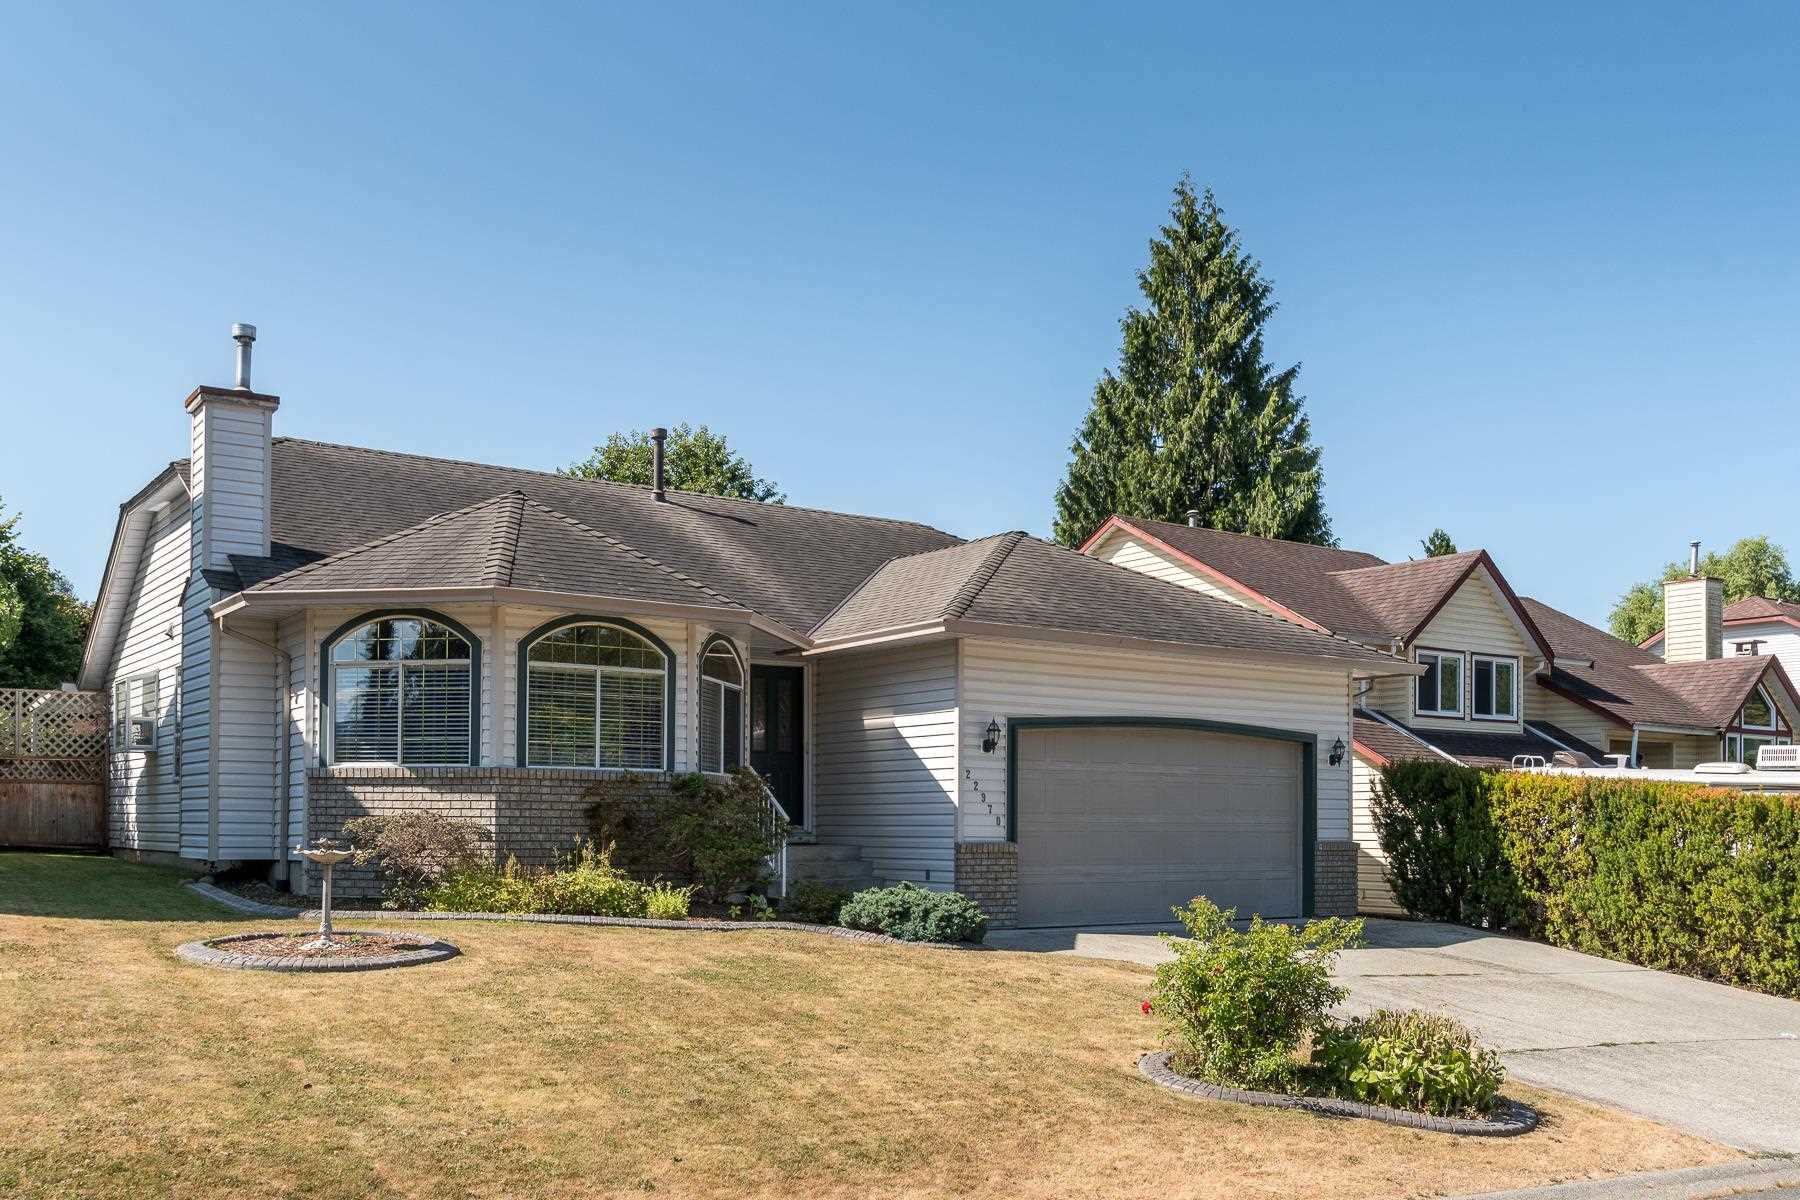 Main Photo: 22970 126 Avenue in Maple Ridge: East Central House for sale : MLS®# R2604751